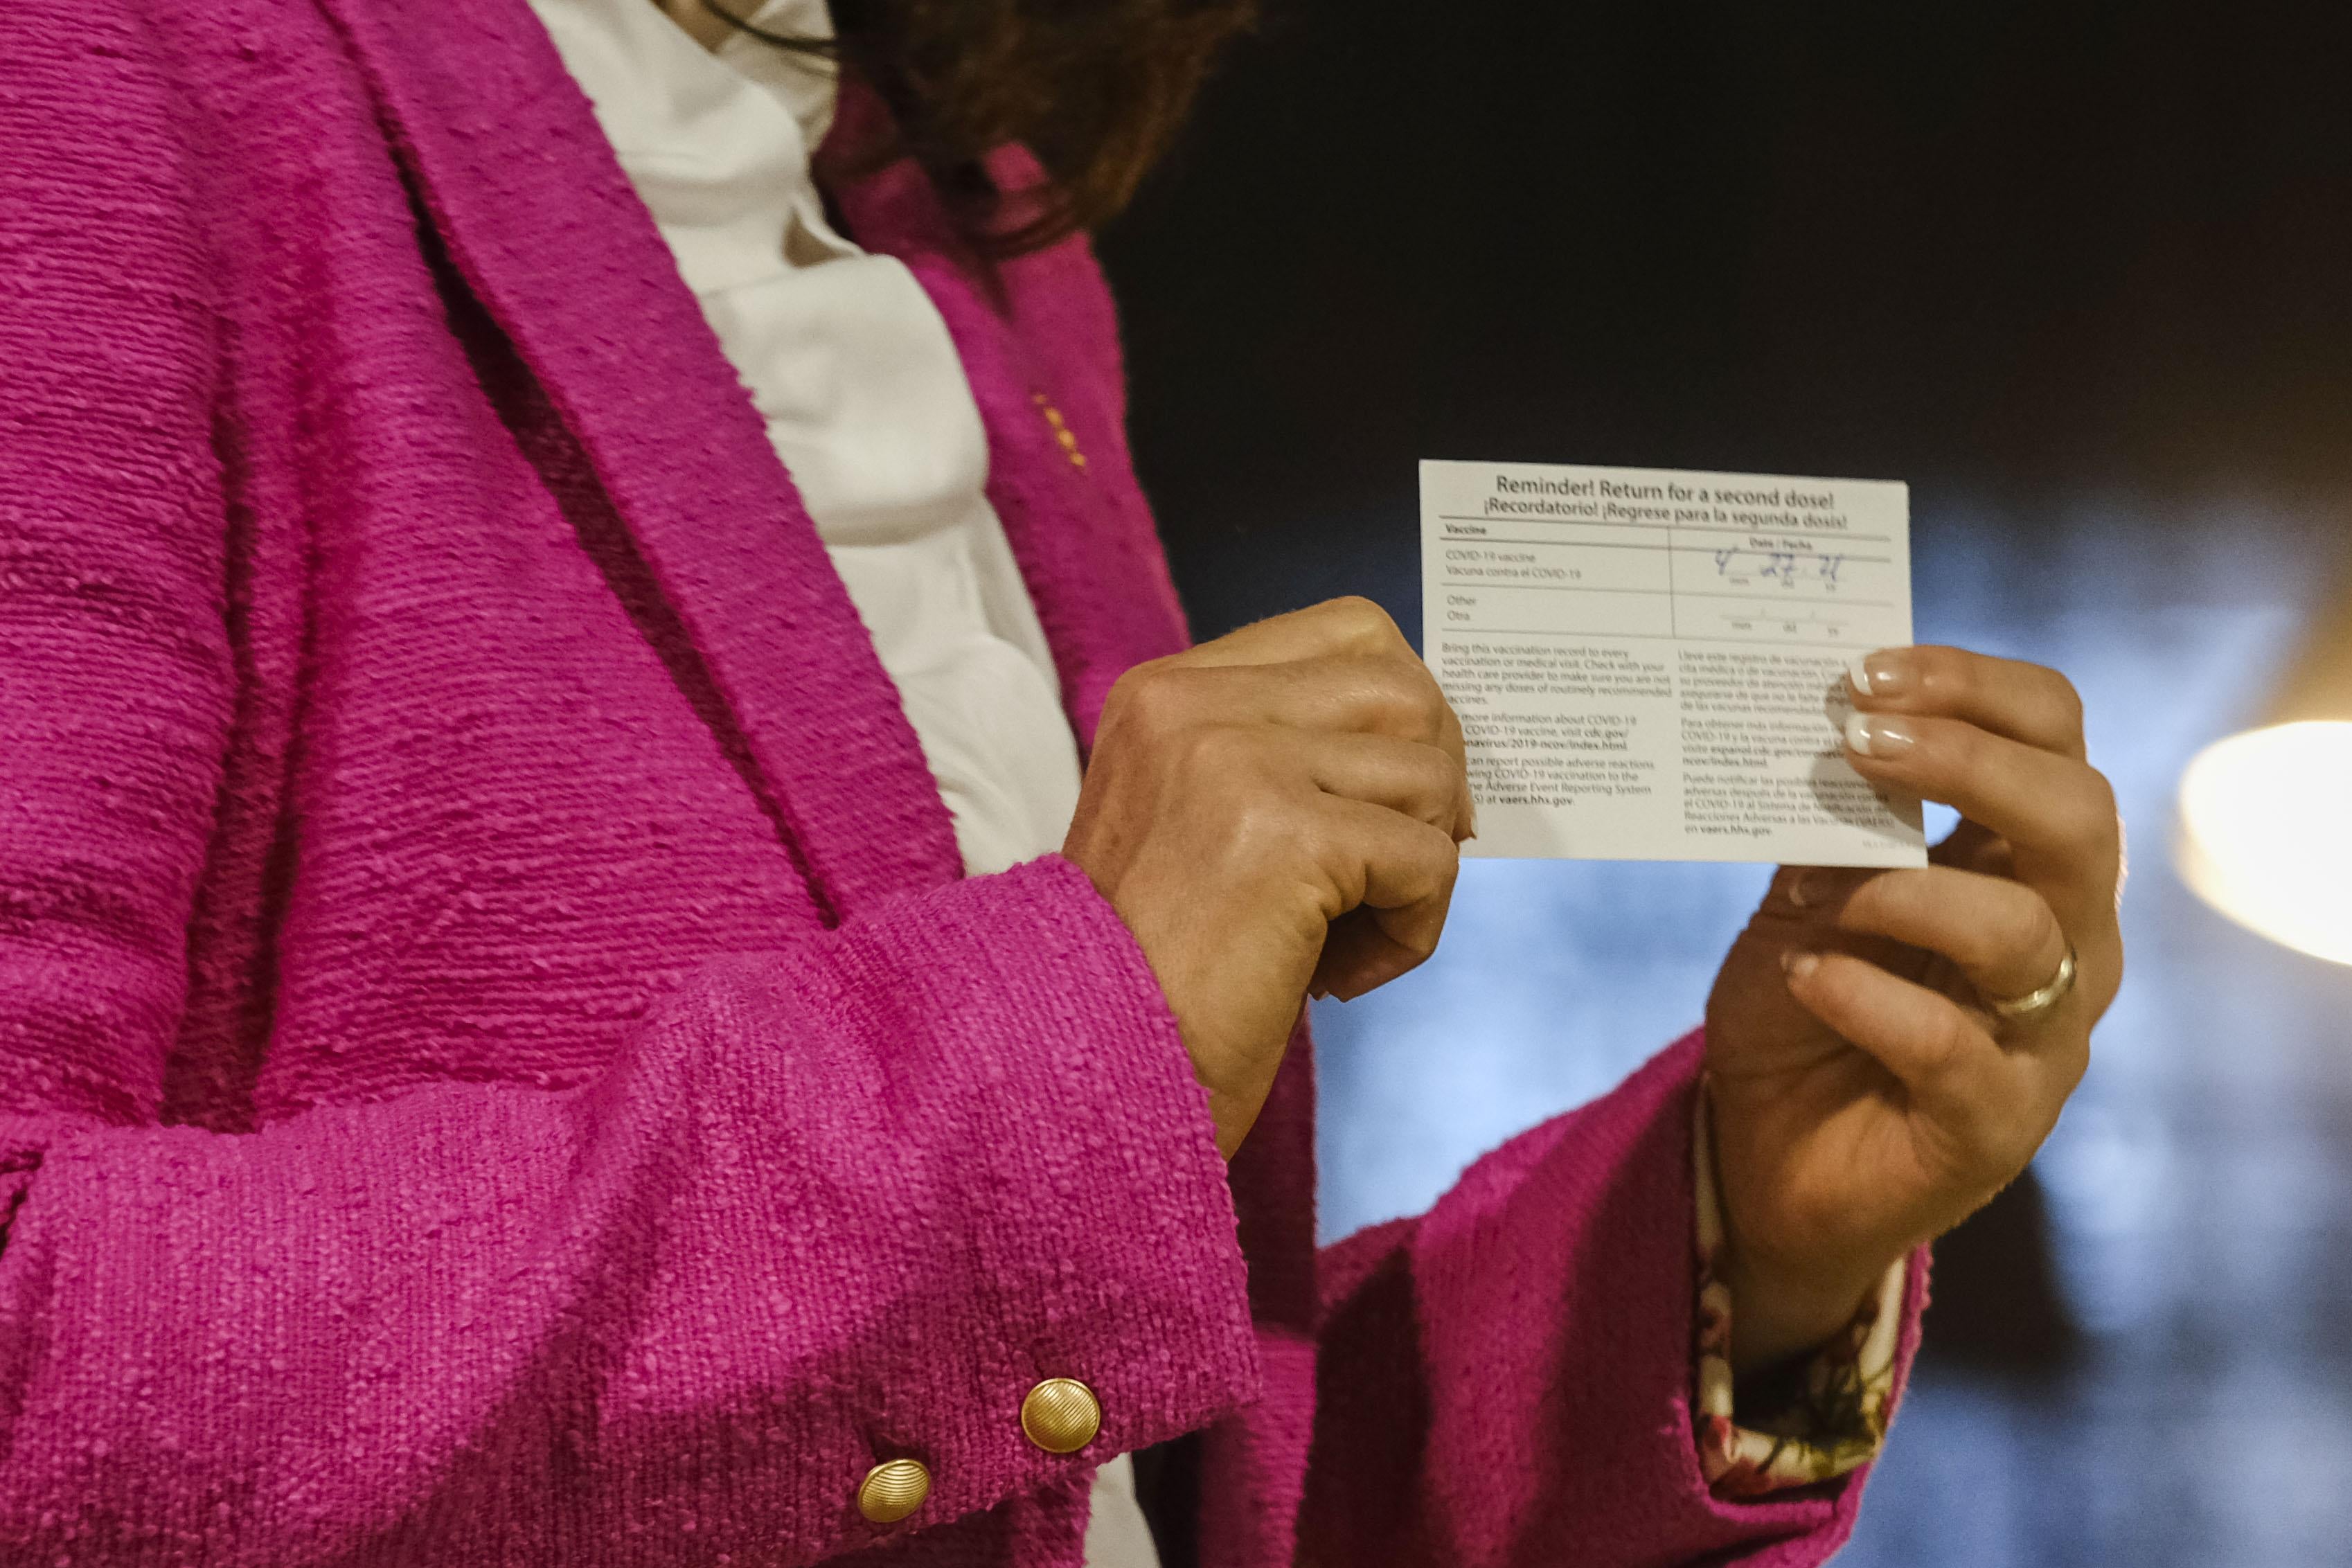 A woman shows holds her vaccine card in her hands.